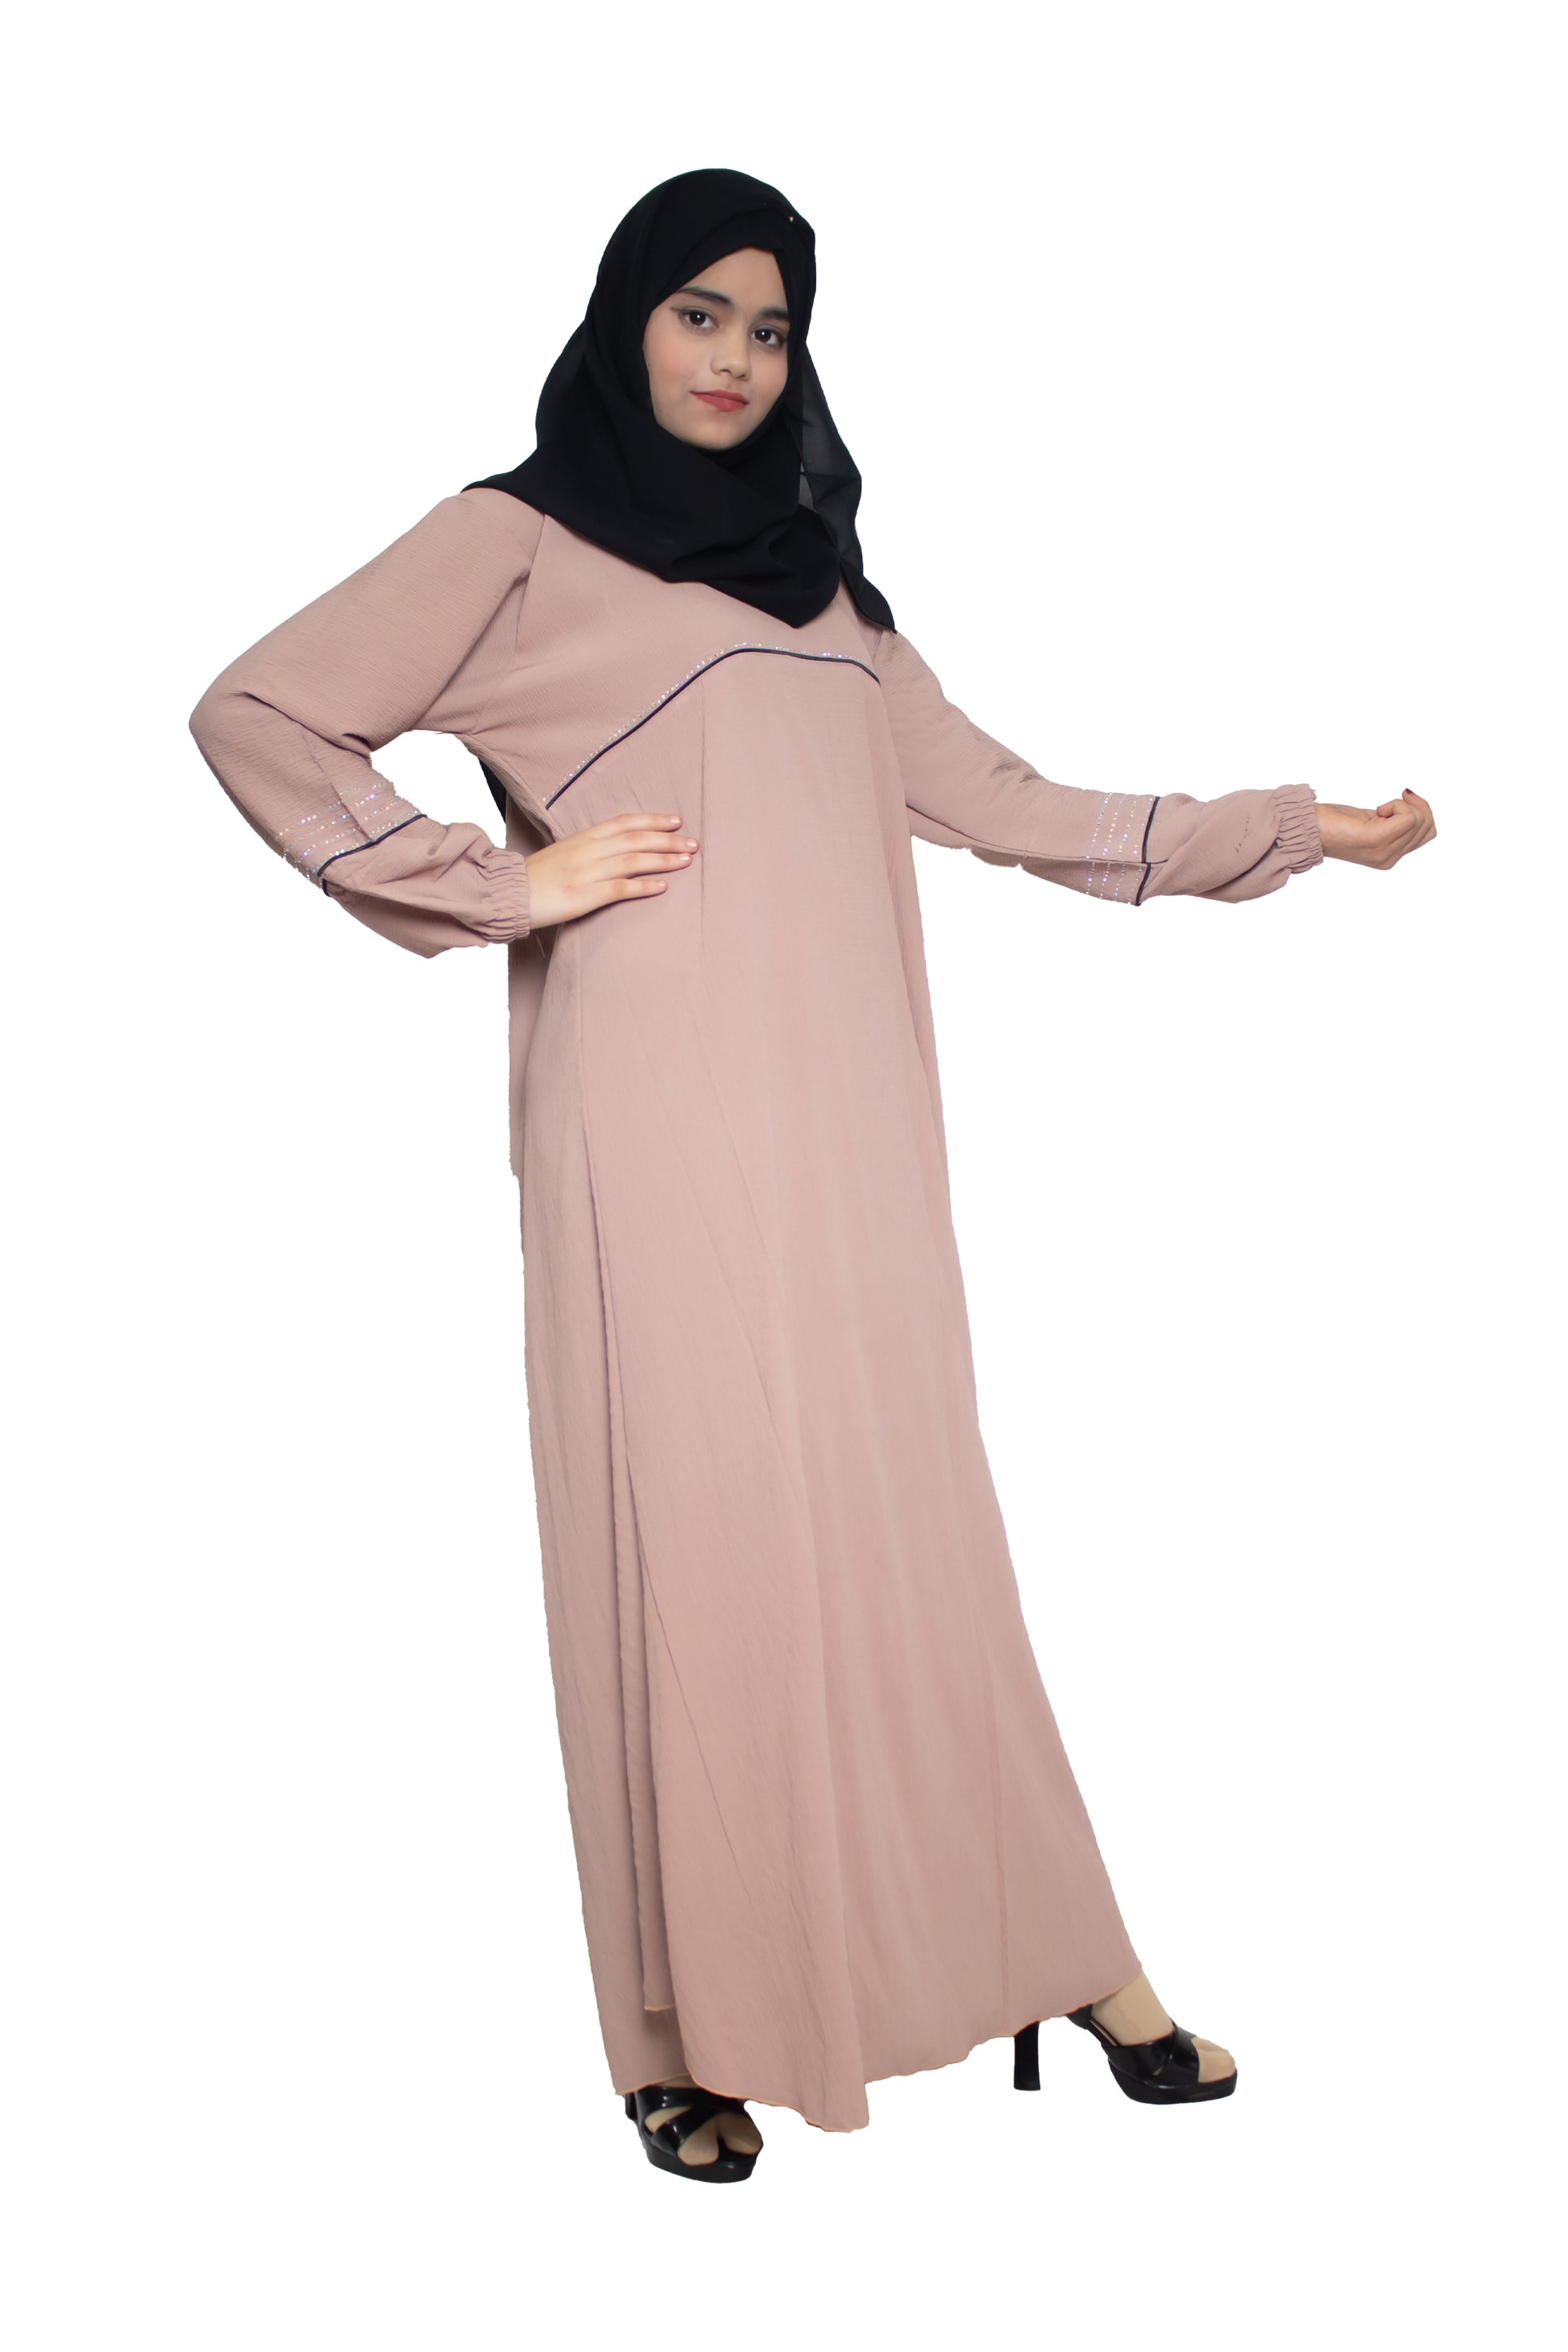 Modest City Self Design Beige Single Piping Abaya or Burqa With Hijab for Women & Girls-Series Laiba